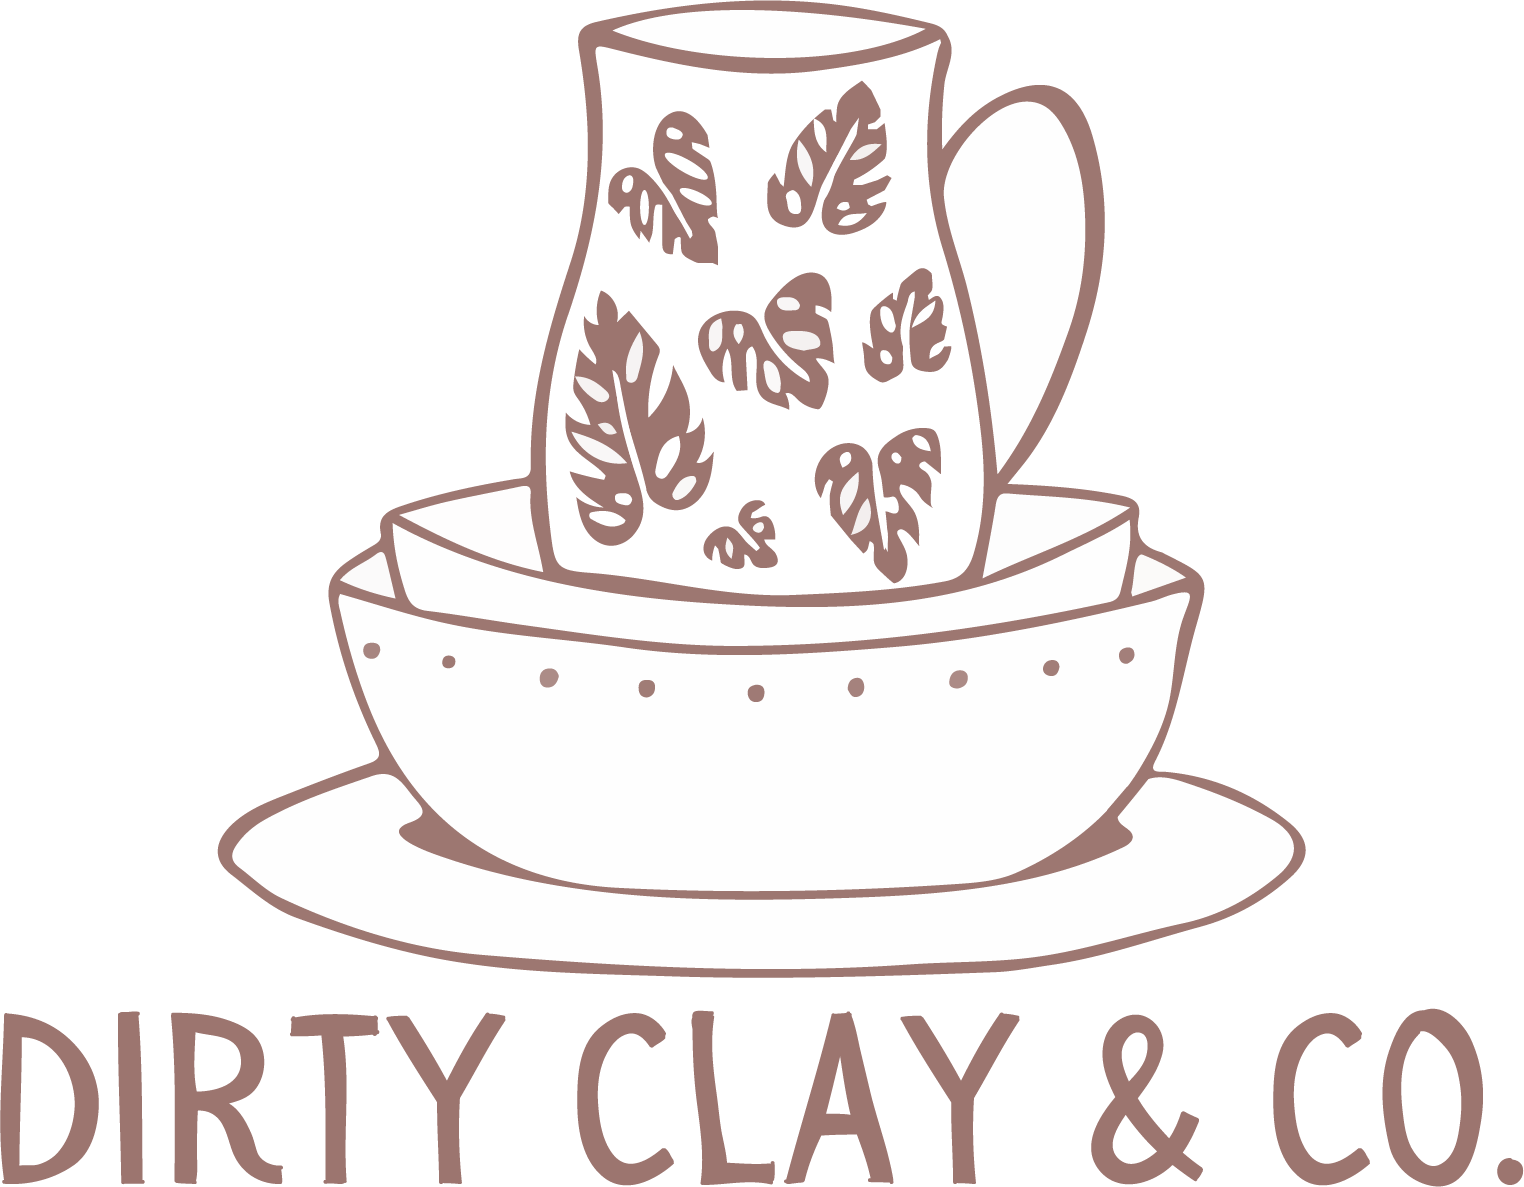 Dirty Clay Co.